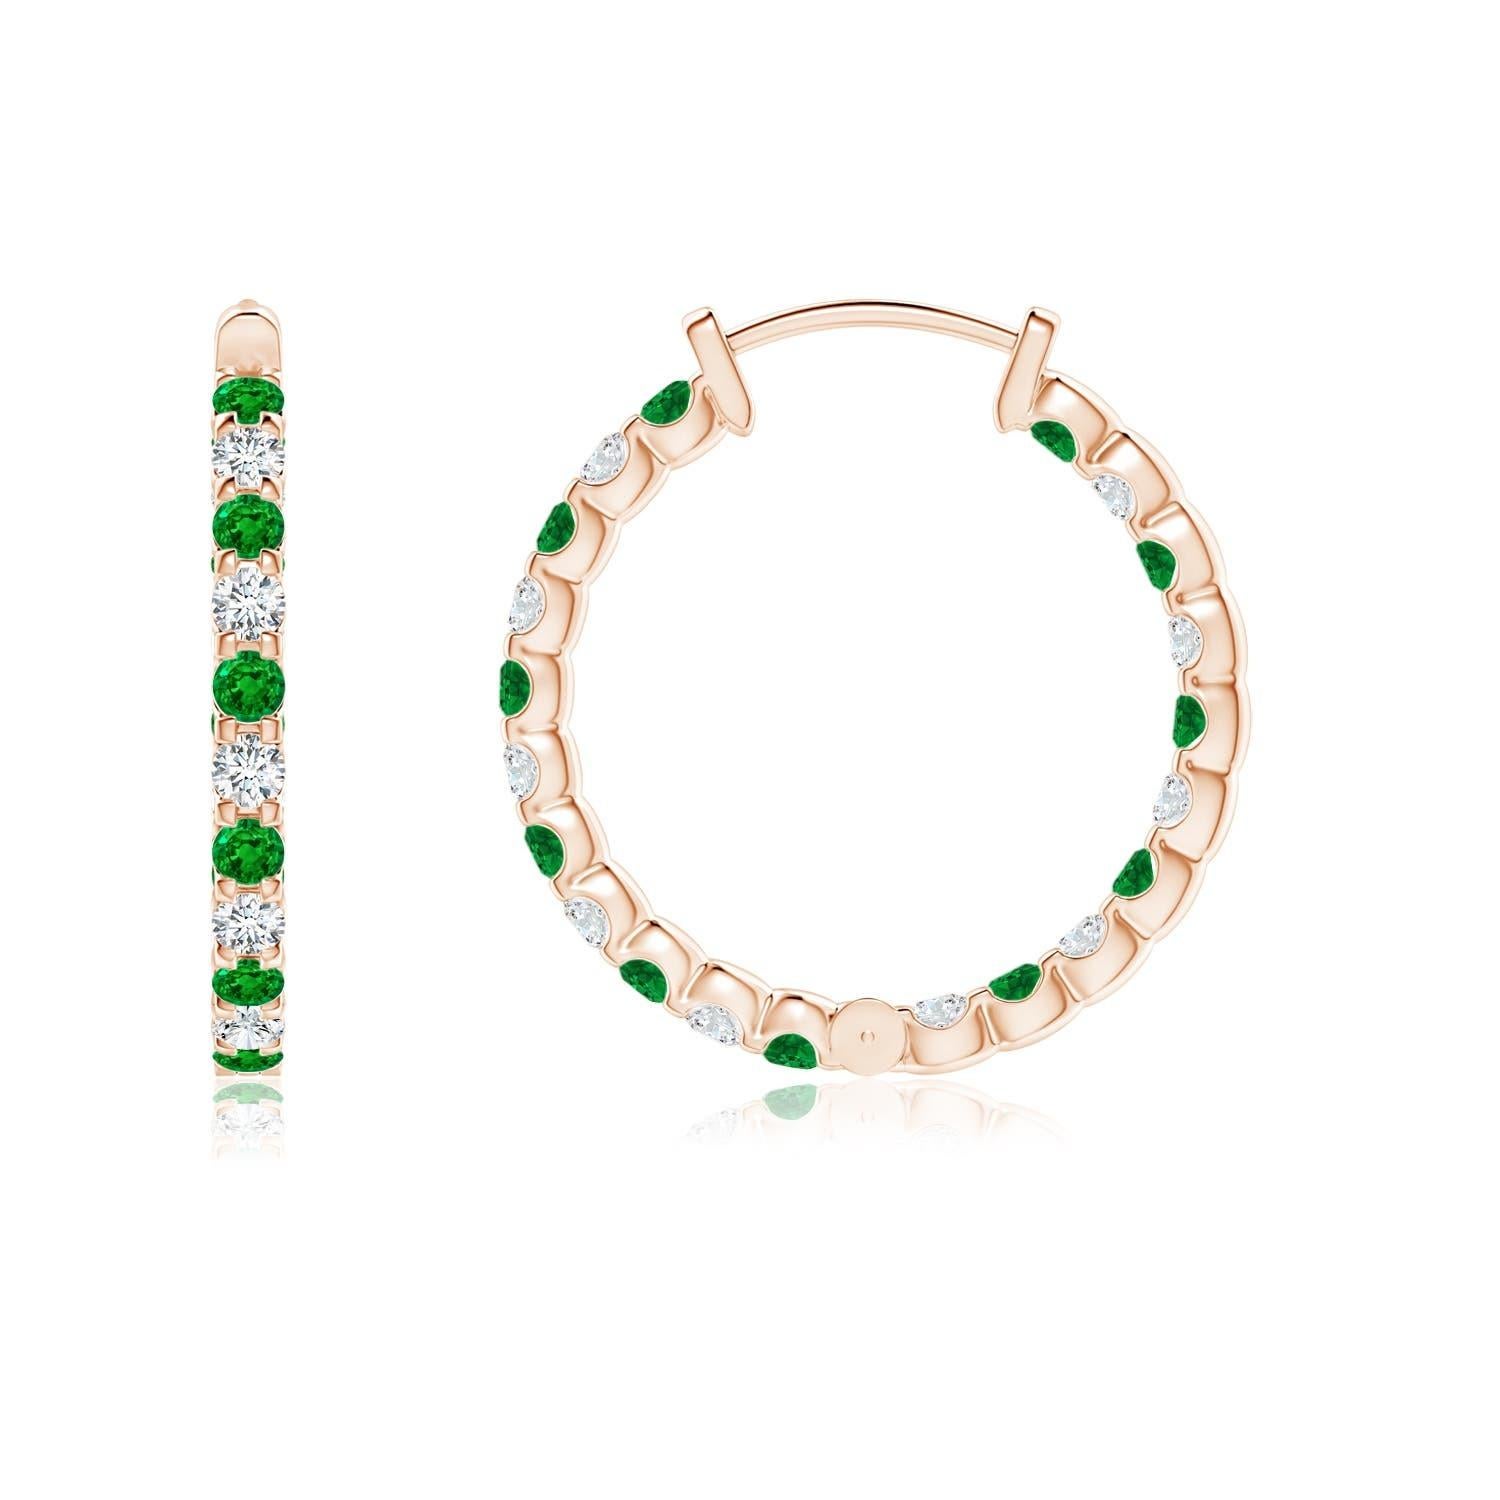 Alternately secured in prong settings are lush green emeralds and brilliant diamonds on these stunning hoop earrings. The scintillating gems are embellished on the outside as well as the inside of these 14k rose gold hoops, showcasing a striking